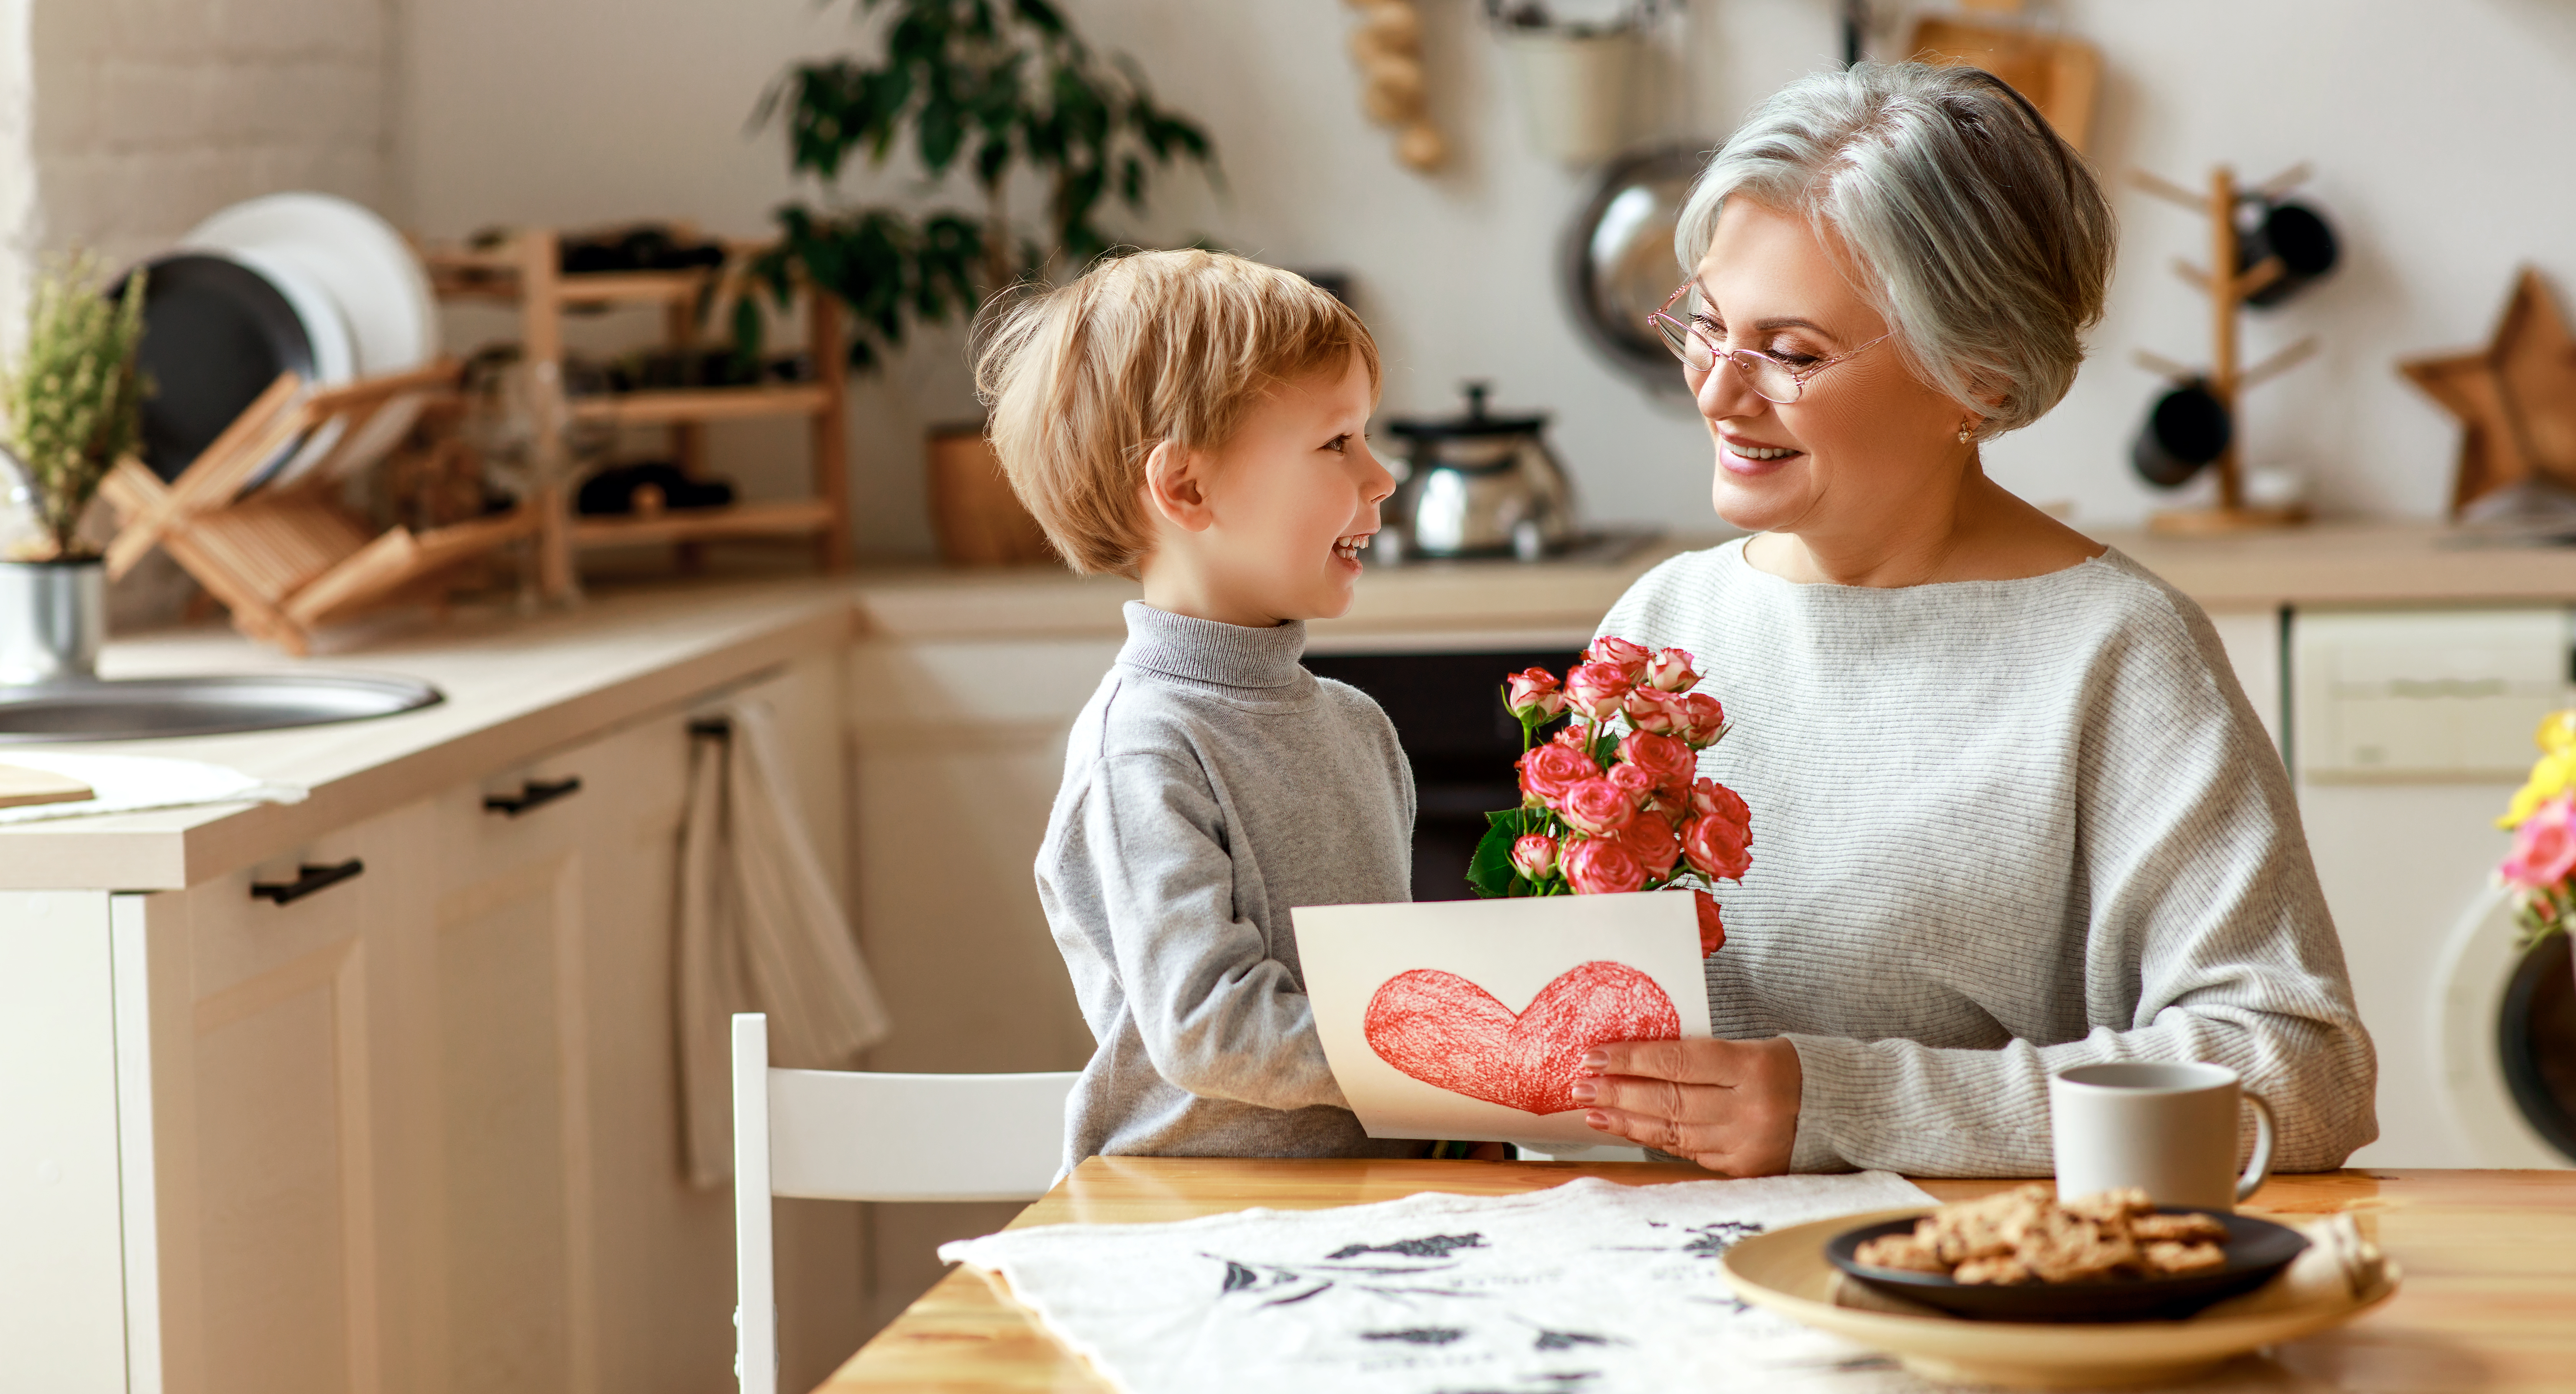 granny with boy | Shutterstock